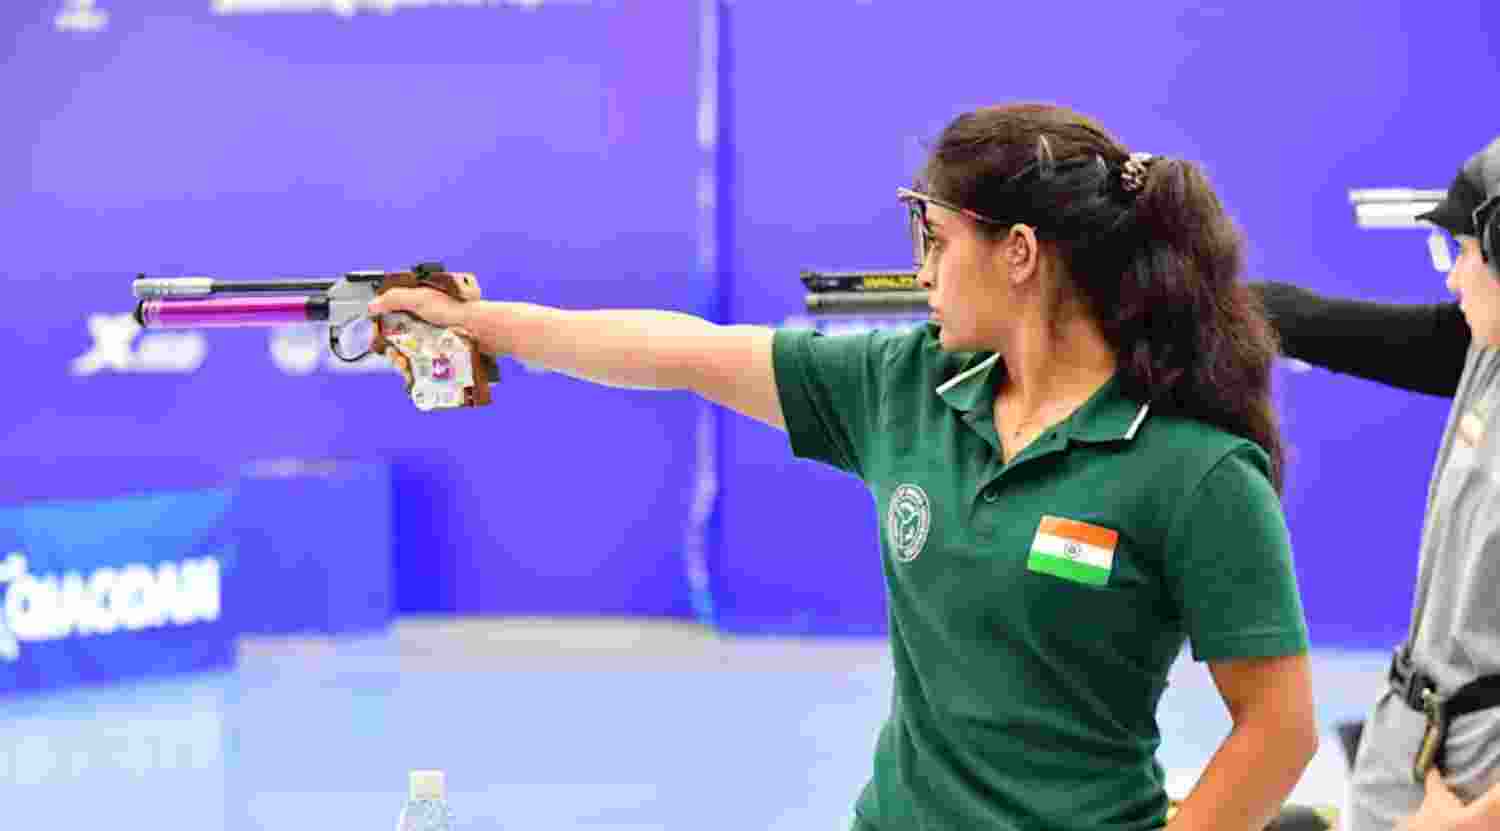 India's shooting team seeks to end 12-year medal drought